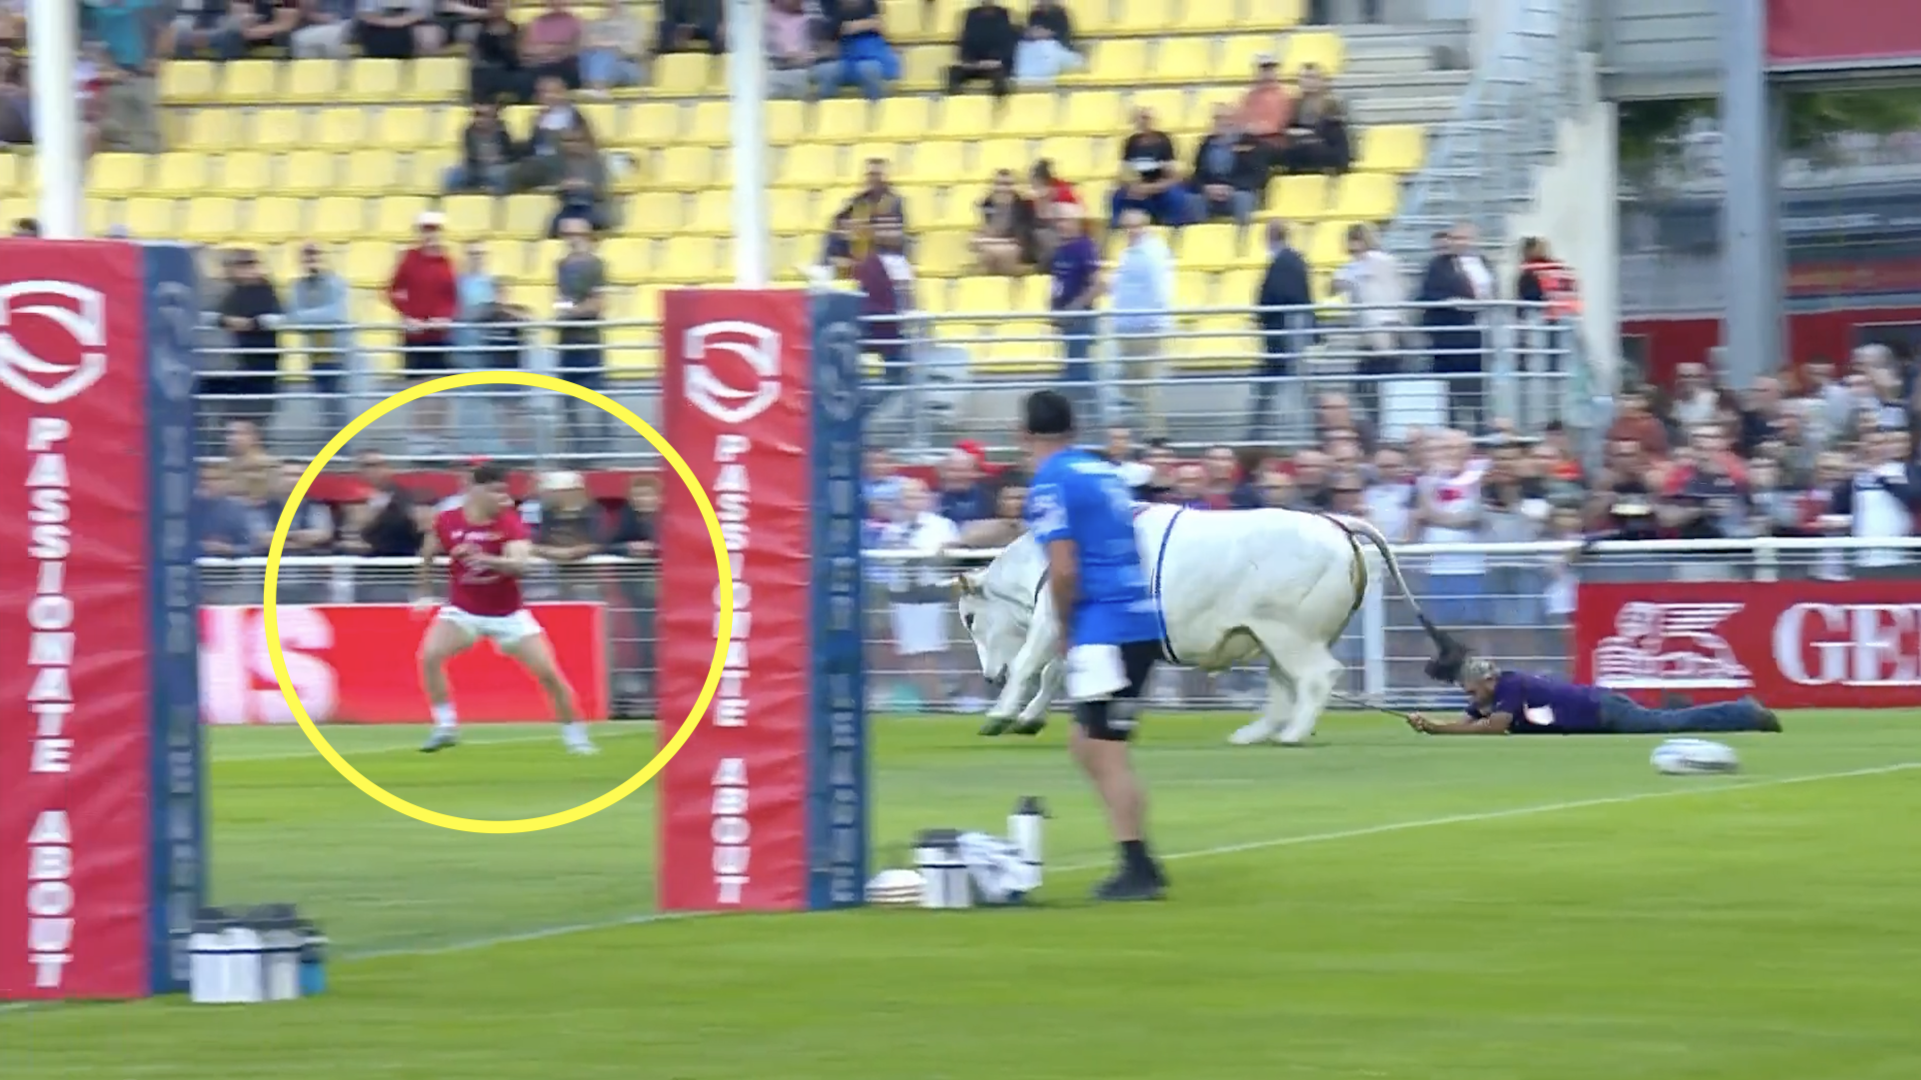 WATCH: Players run for their lives as raging bull breaks loose on field